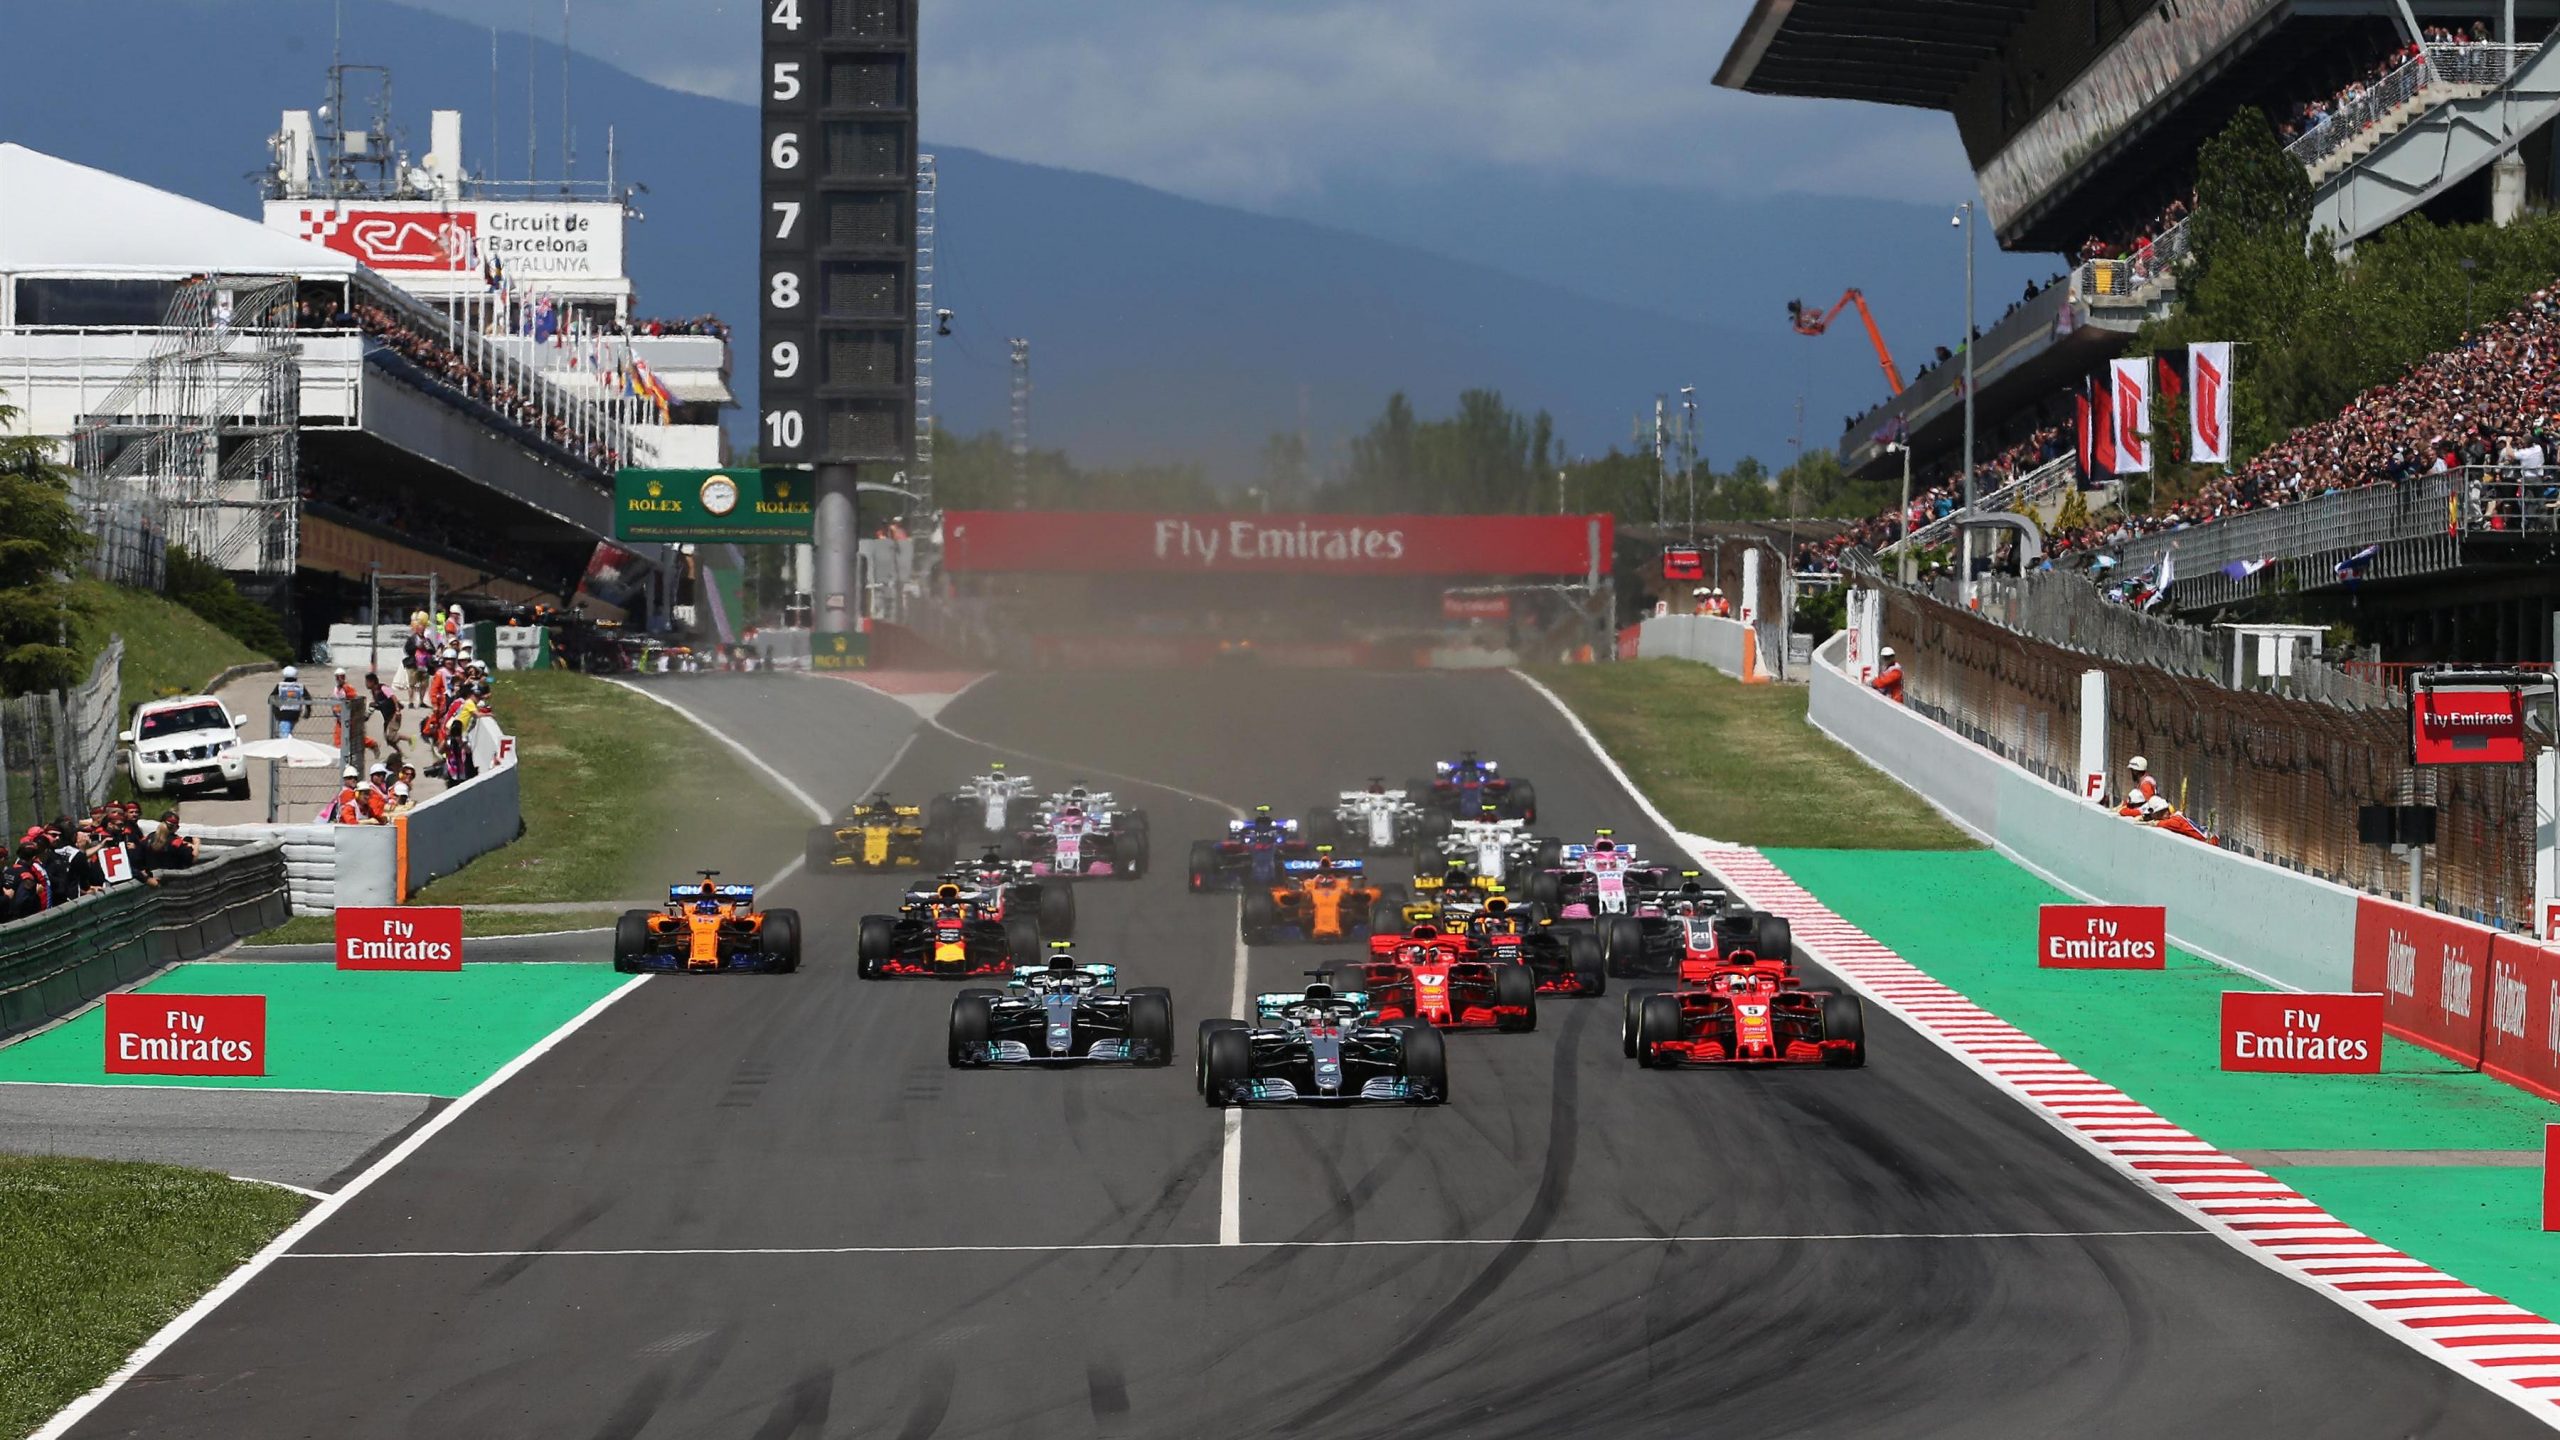 Formula 1 GP Barcelona: Broadcast, Time, Schedule, Circuit & Qualifying